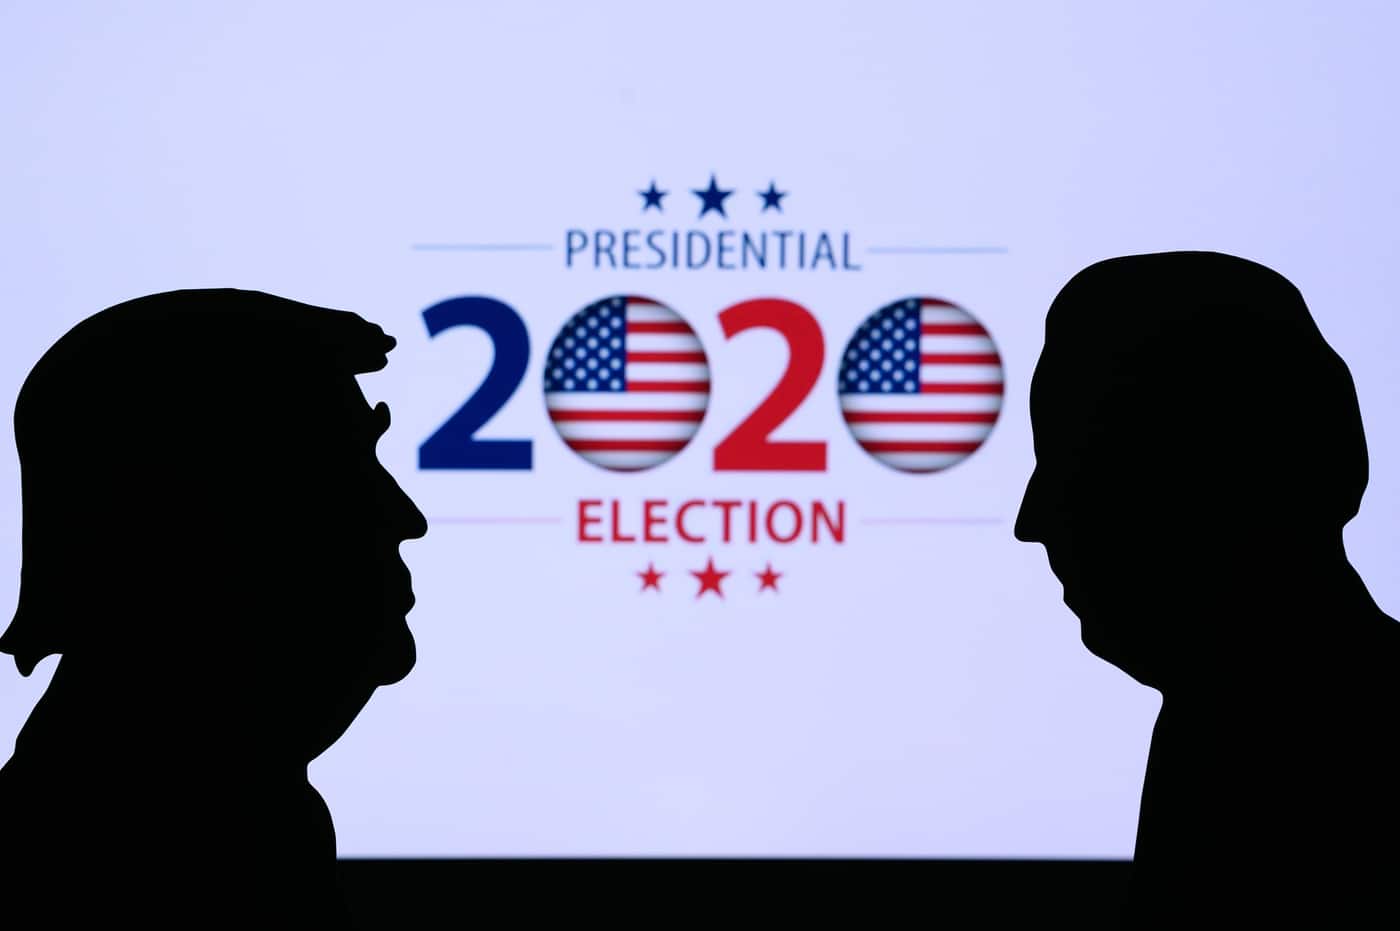 Silhouettes of two people face each other. "Presidential 2020 Election" text with U.S. flag motifs. Discuss BTC, buy crypto trends.